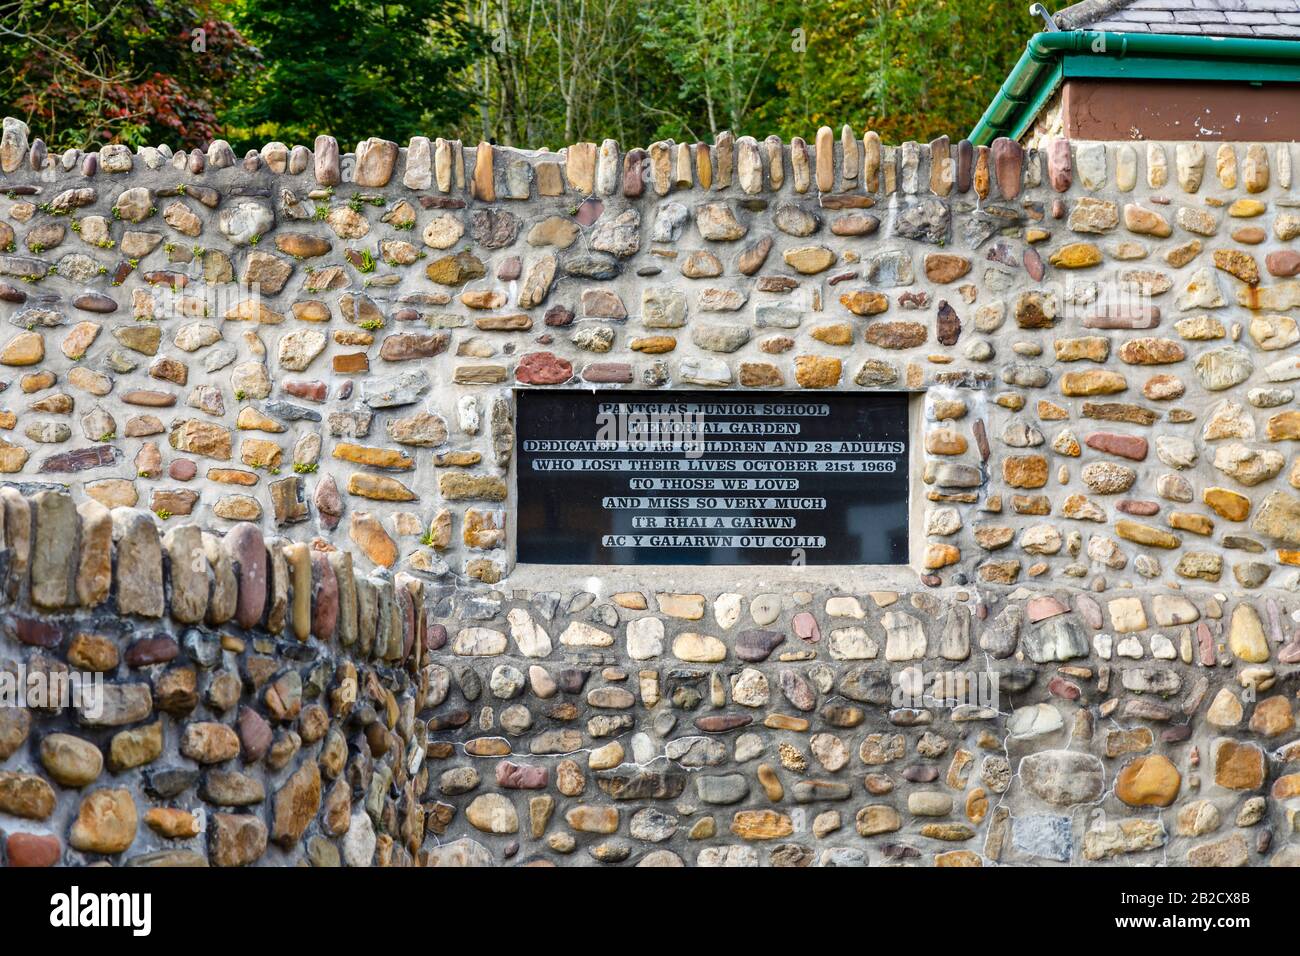 Aberfan Memorial Garden, on the site of Pantglas Junior School where the disaster occurred in 1966 killing 116 children and 28 adults, Wales Stock Photo